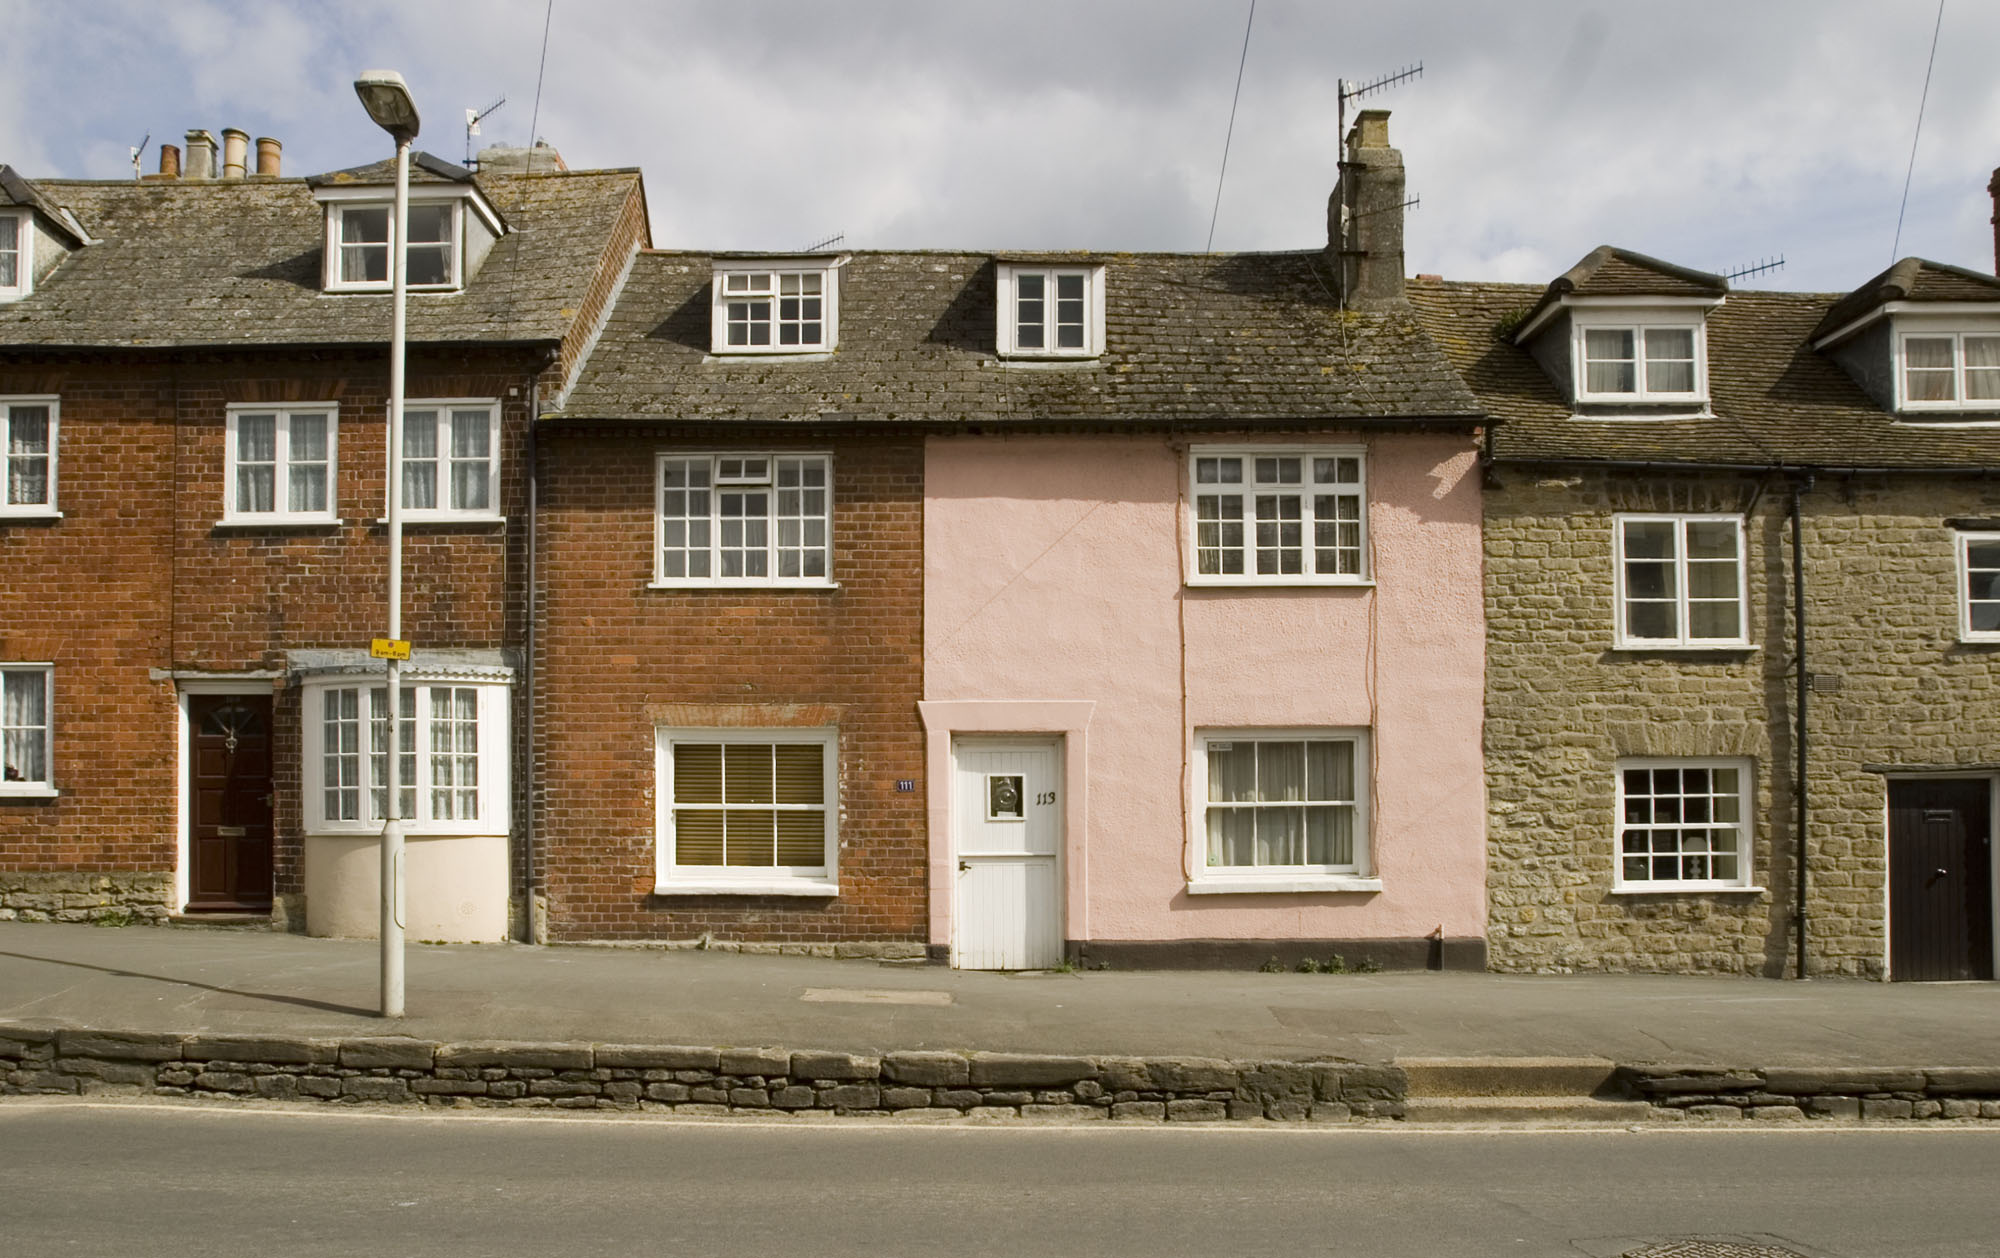 Three attached houses along a street, each with a different wall type. From left to right: brick, render and stone.